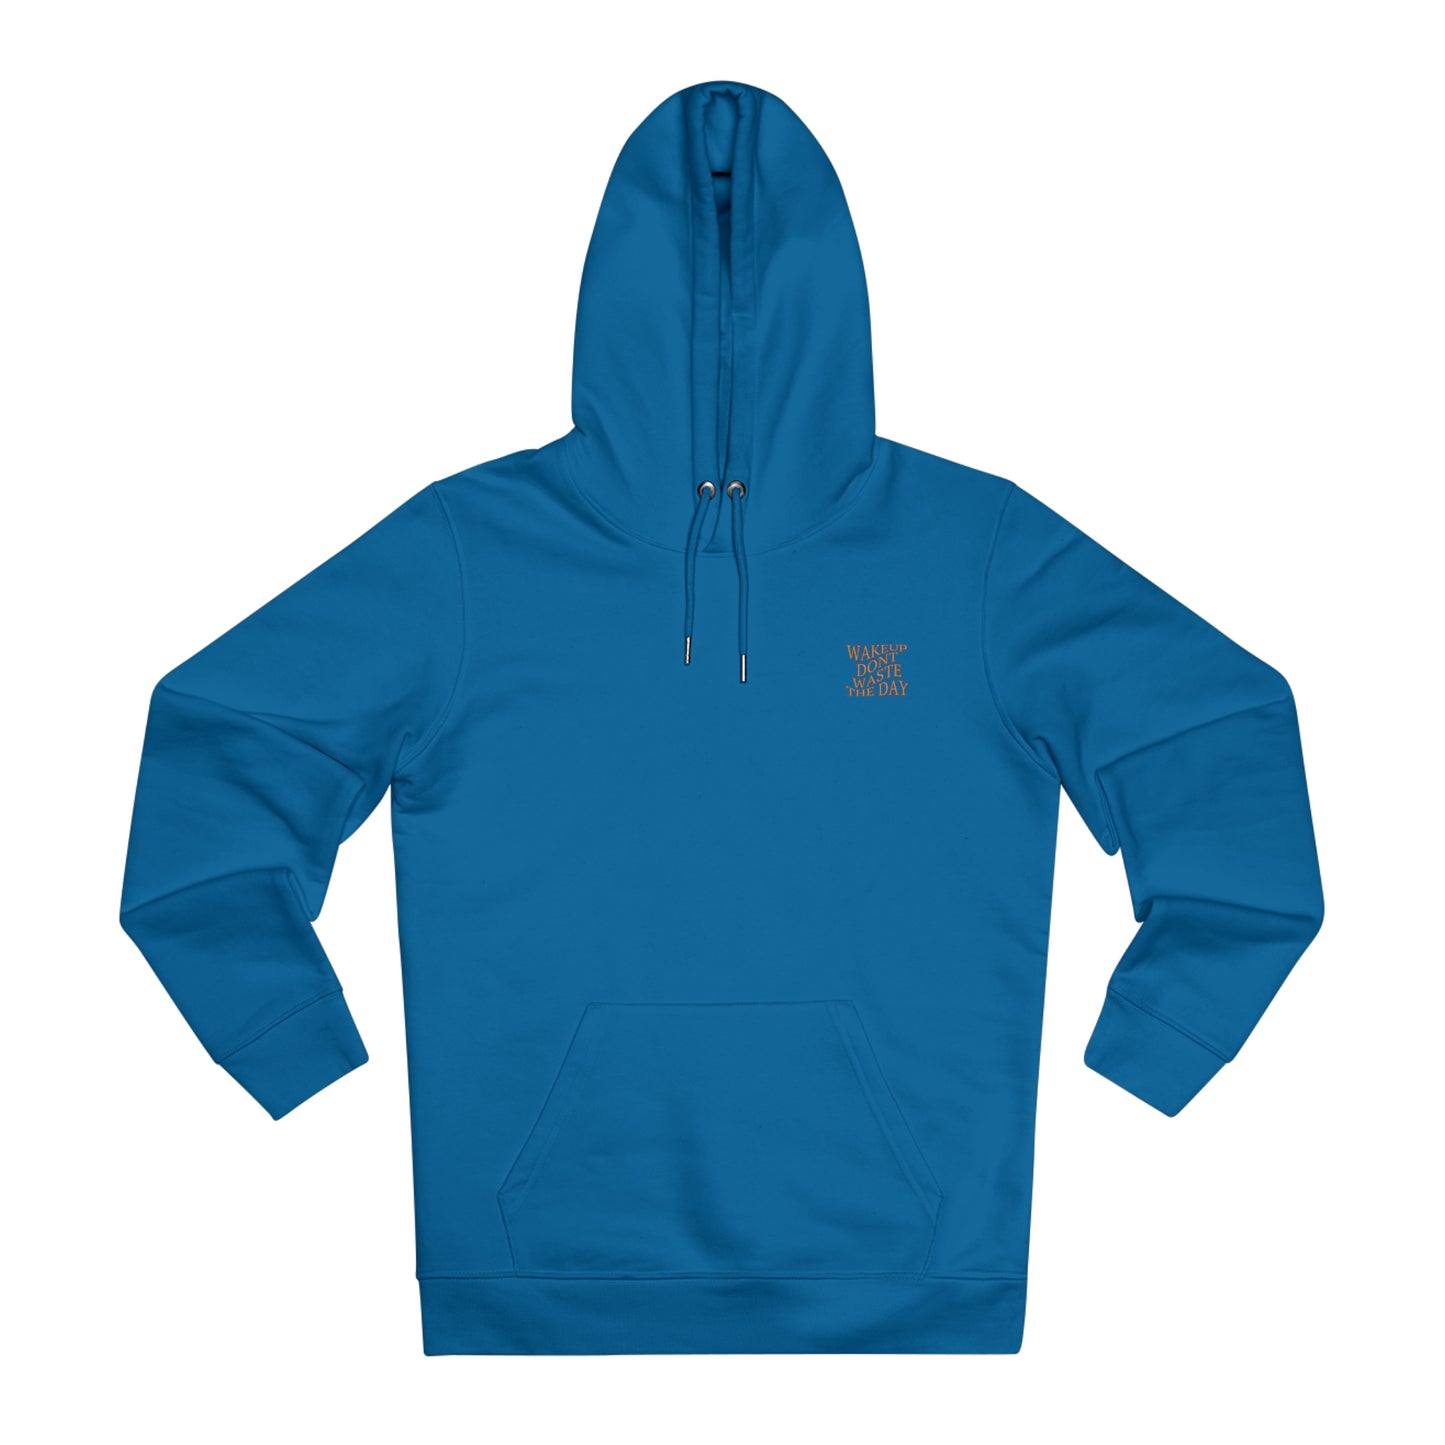 WAKE UP Faith Over Fear Premium Lux Hoodie